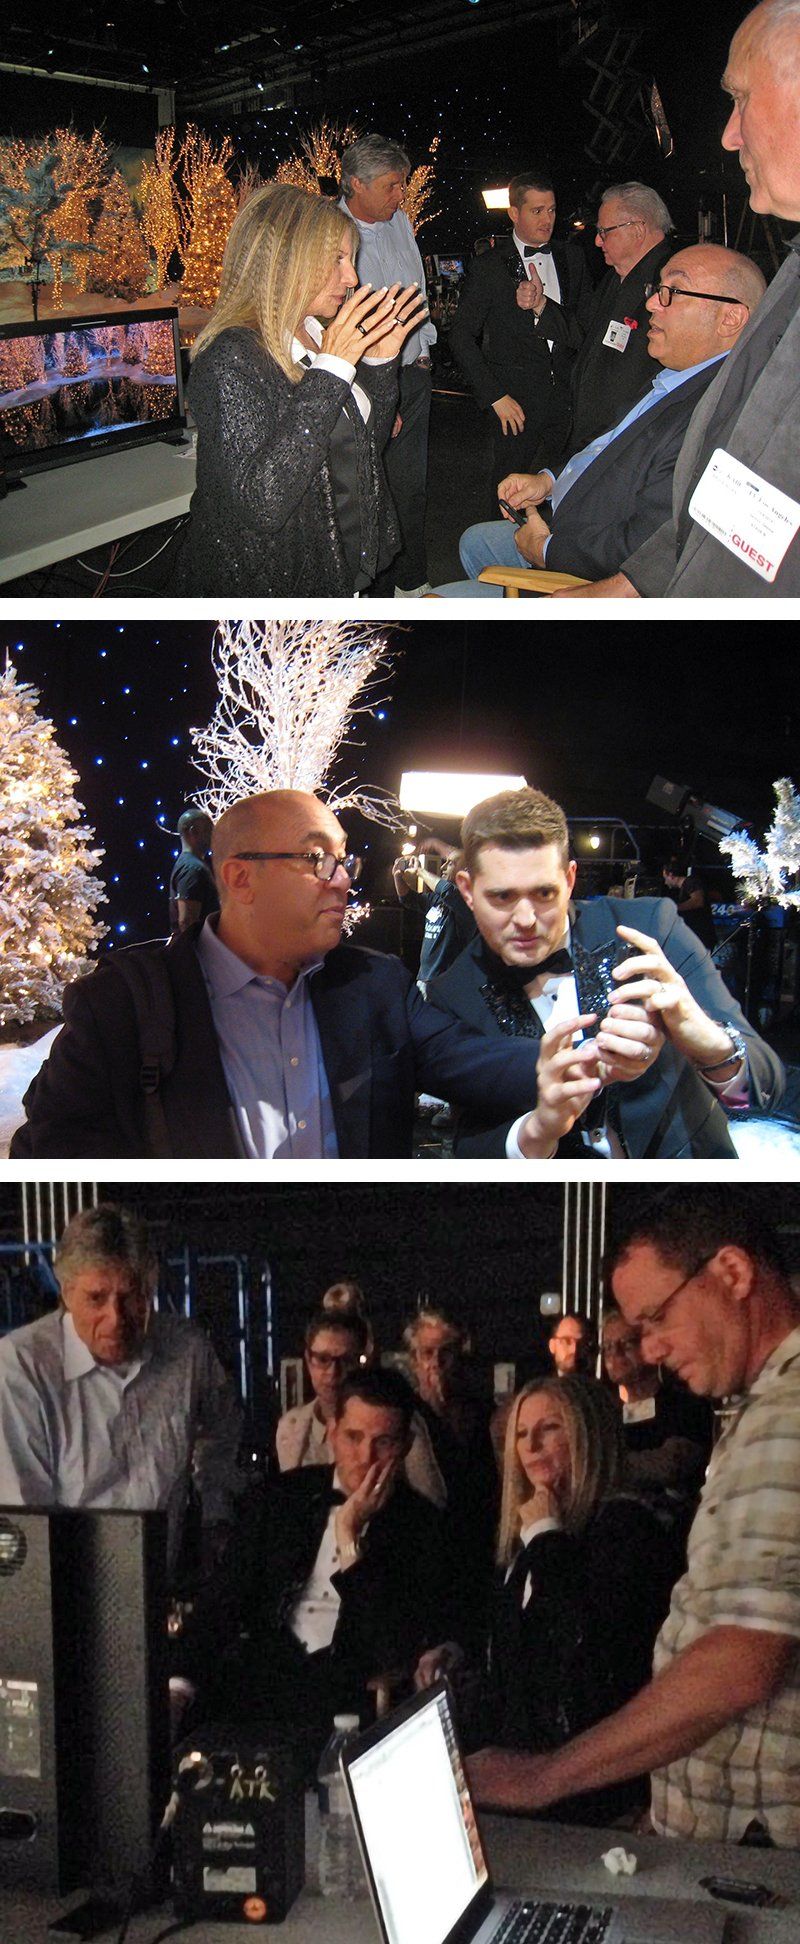 Behind the scenes photos with Michael Buble.